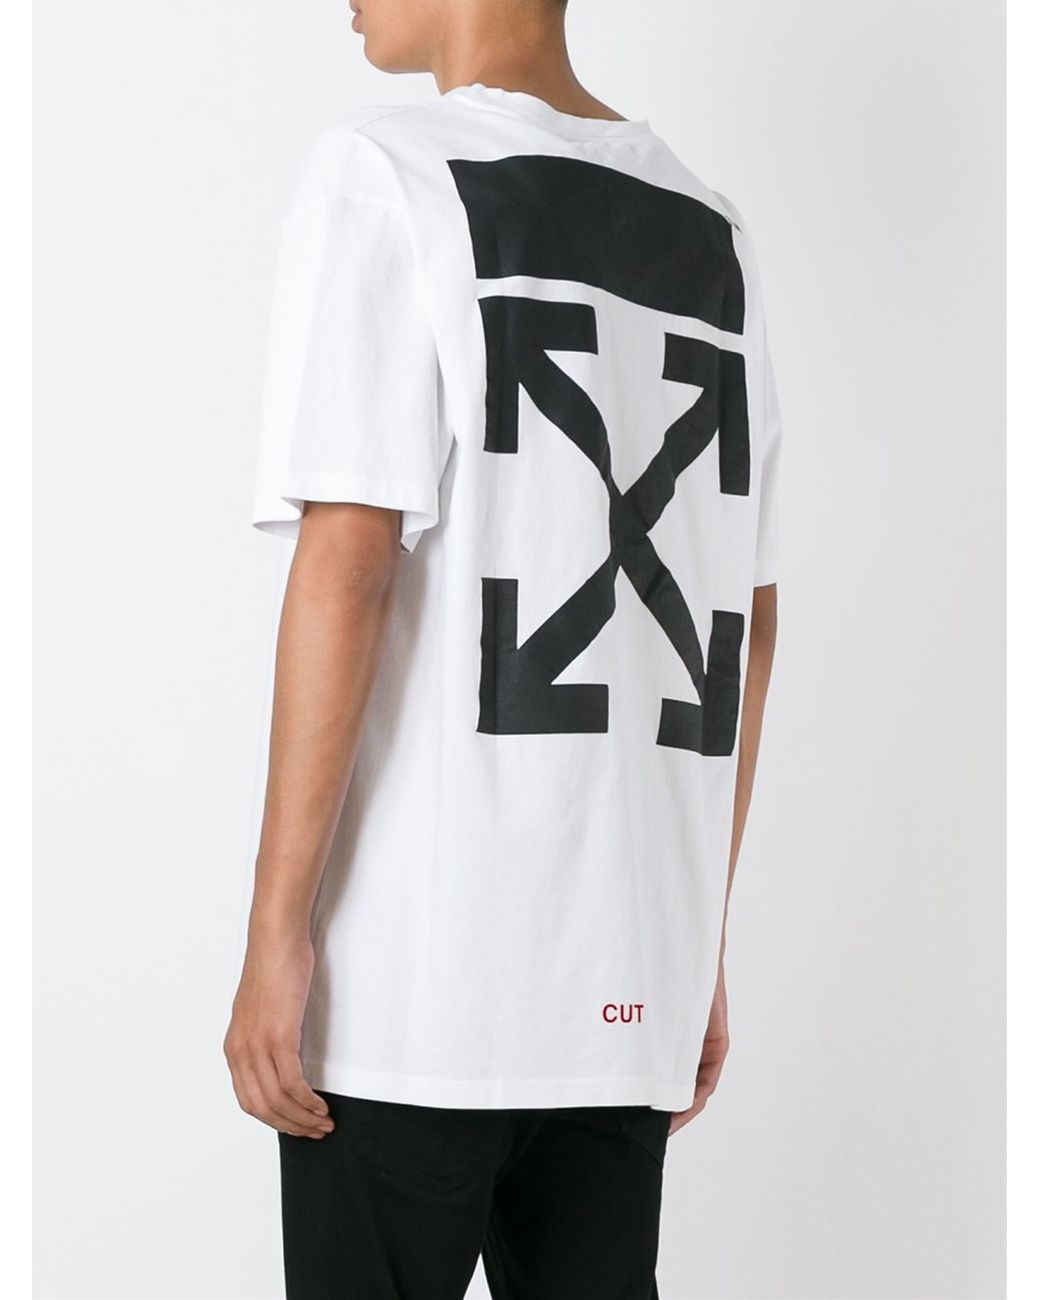 Off-White c/o Virgil Abloh Cut Off Printed Cotton T-Shirt in White for Men  | Lyst